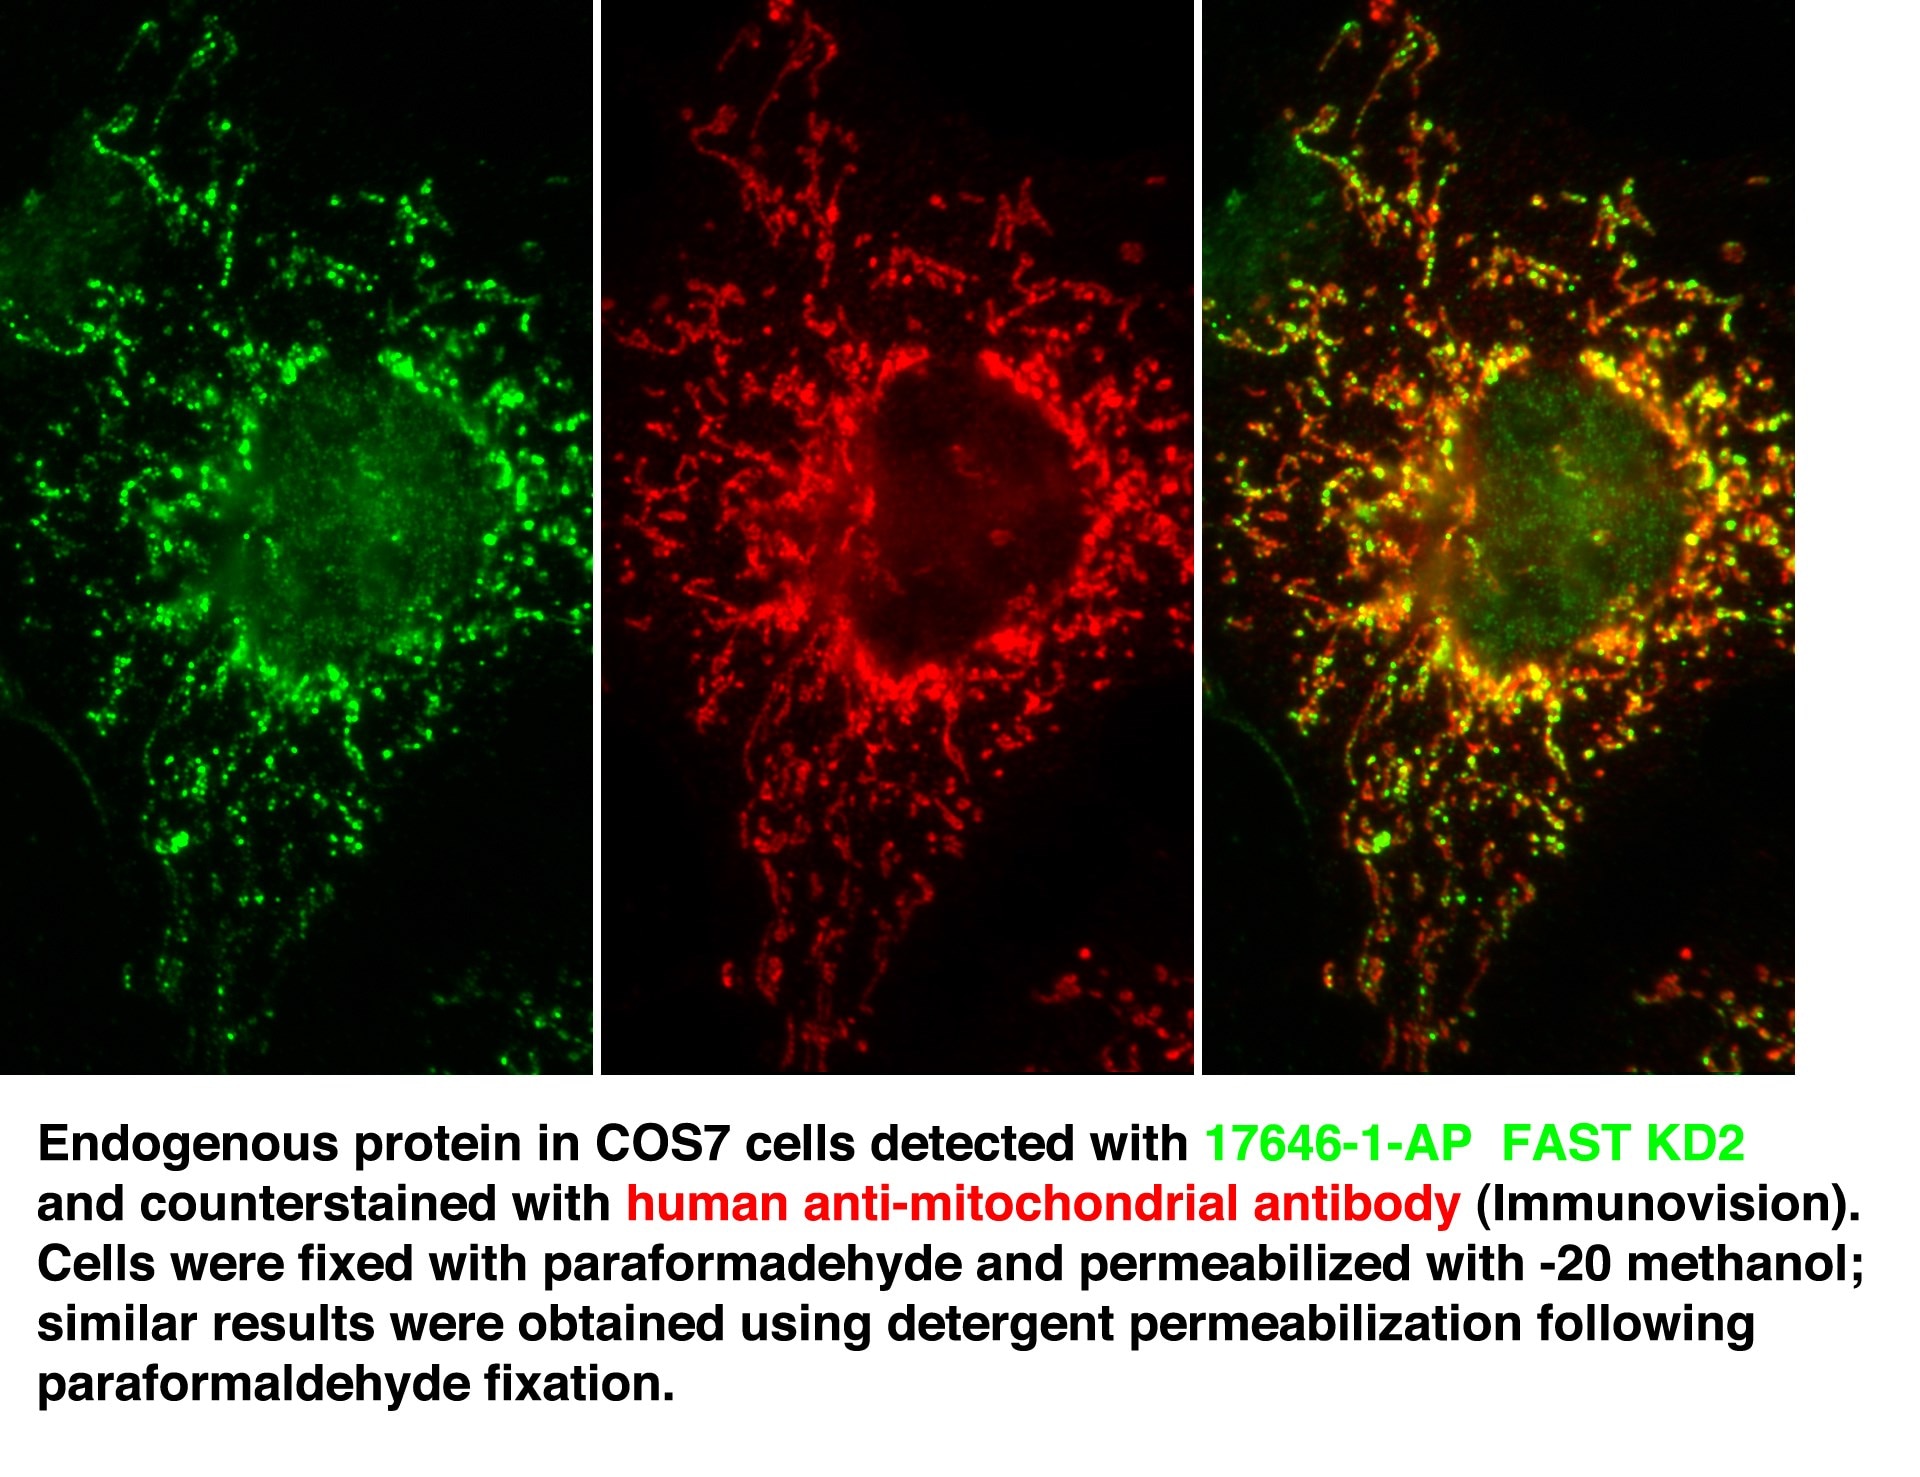 IF Staining of COS7 cells using 17464-1-AP